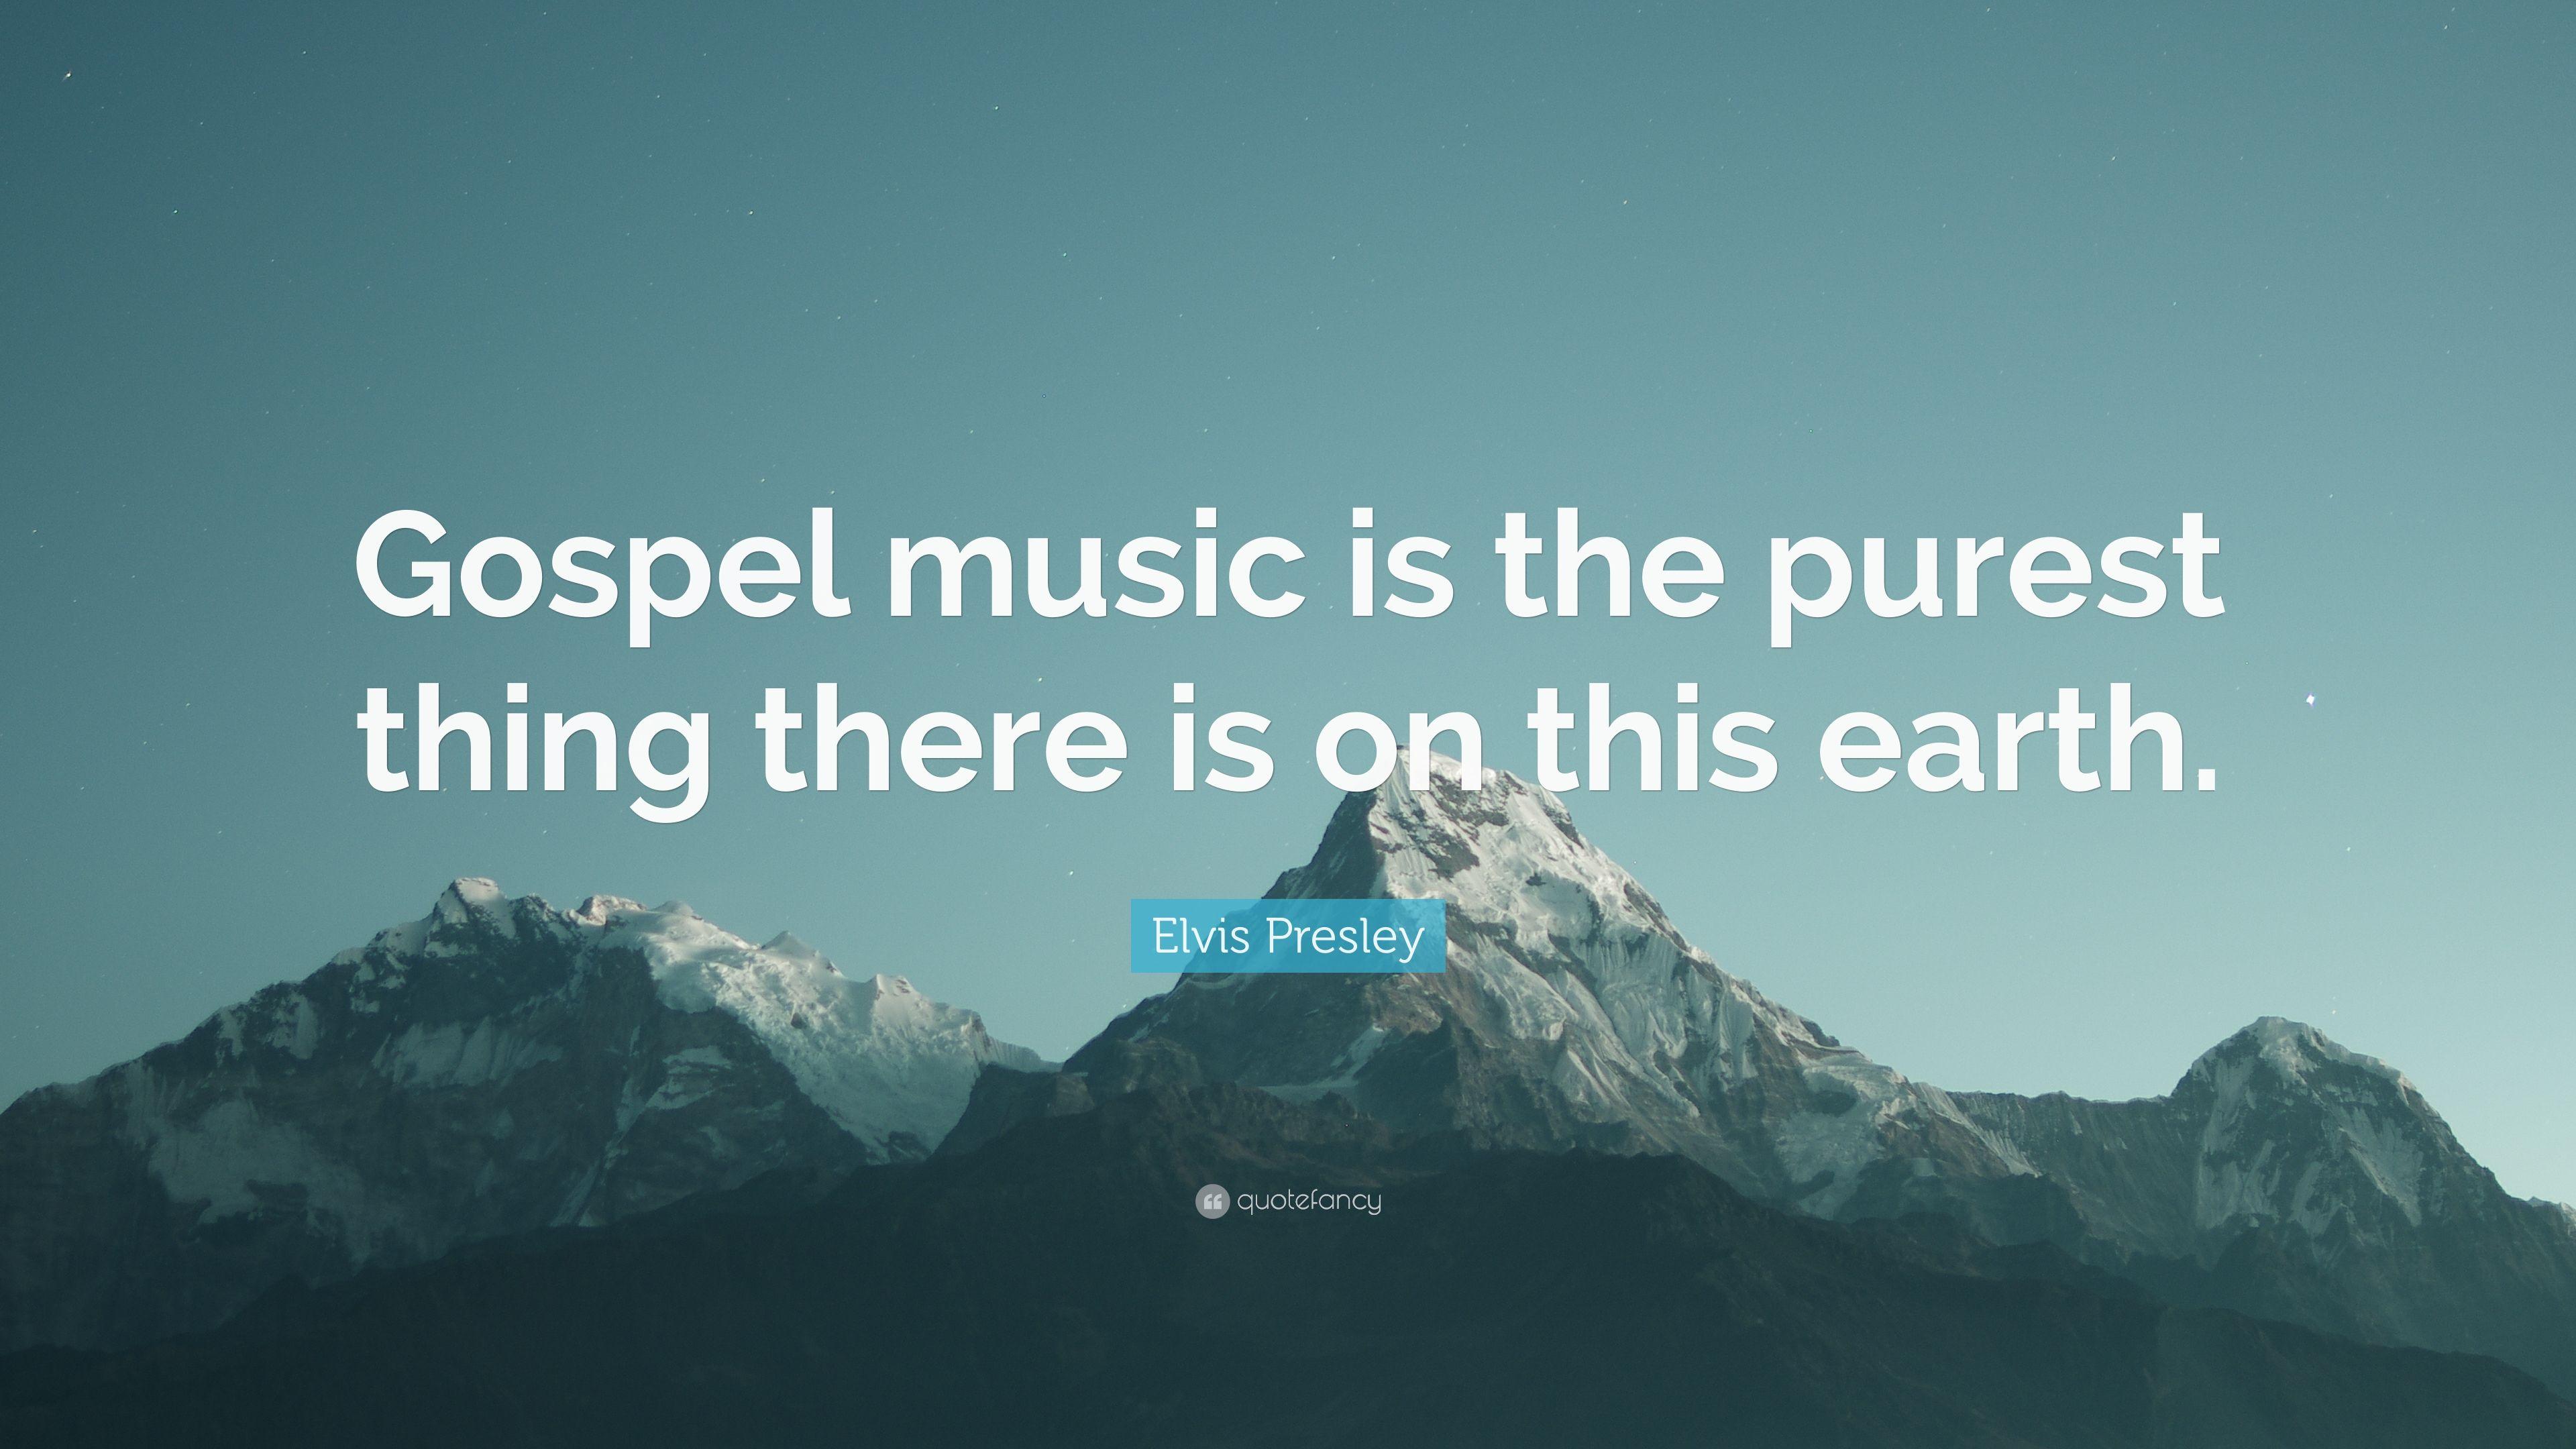 Elvis Presley Quote: “Gospel music is the purest thing there is